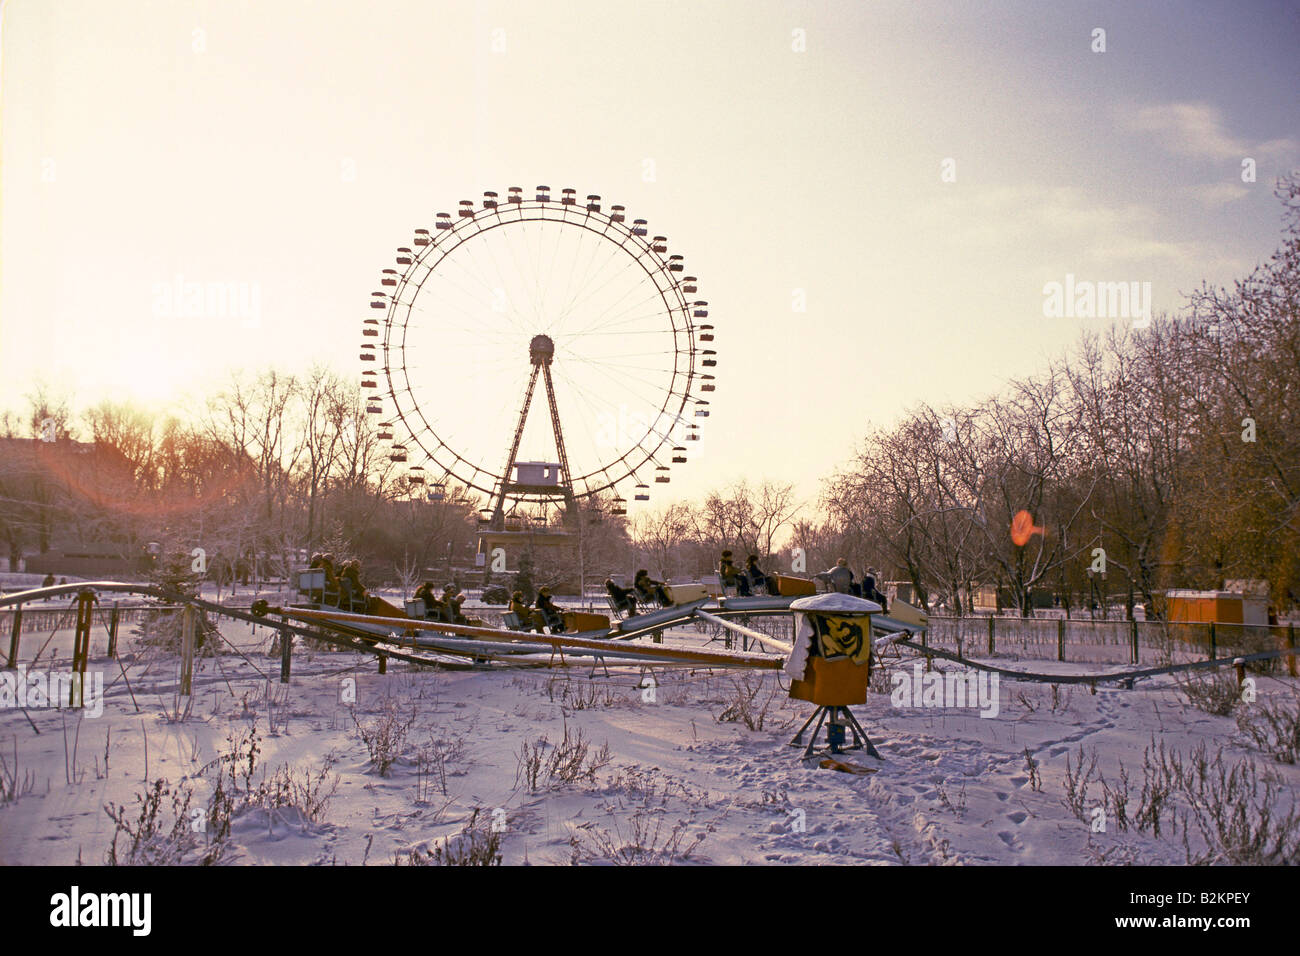 Small fairground in Gorky park, Moscow Stock Photo